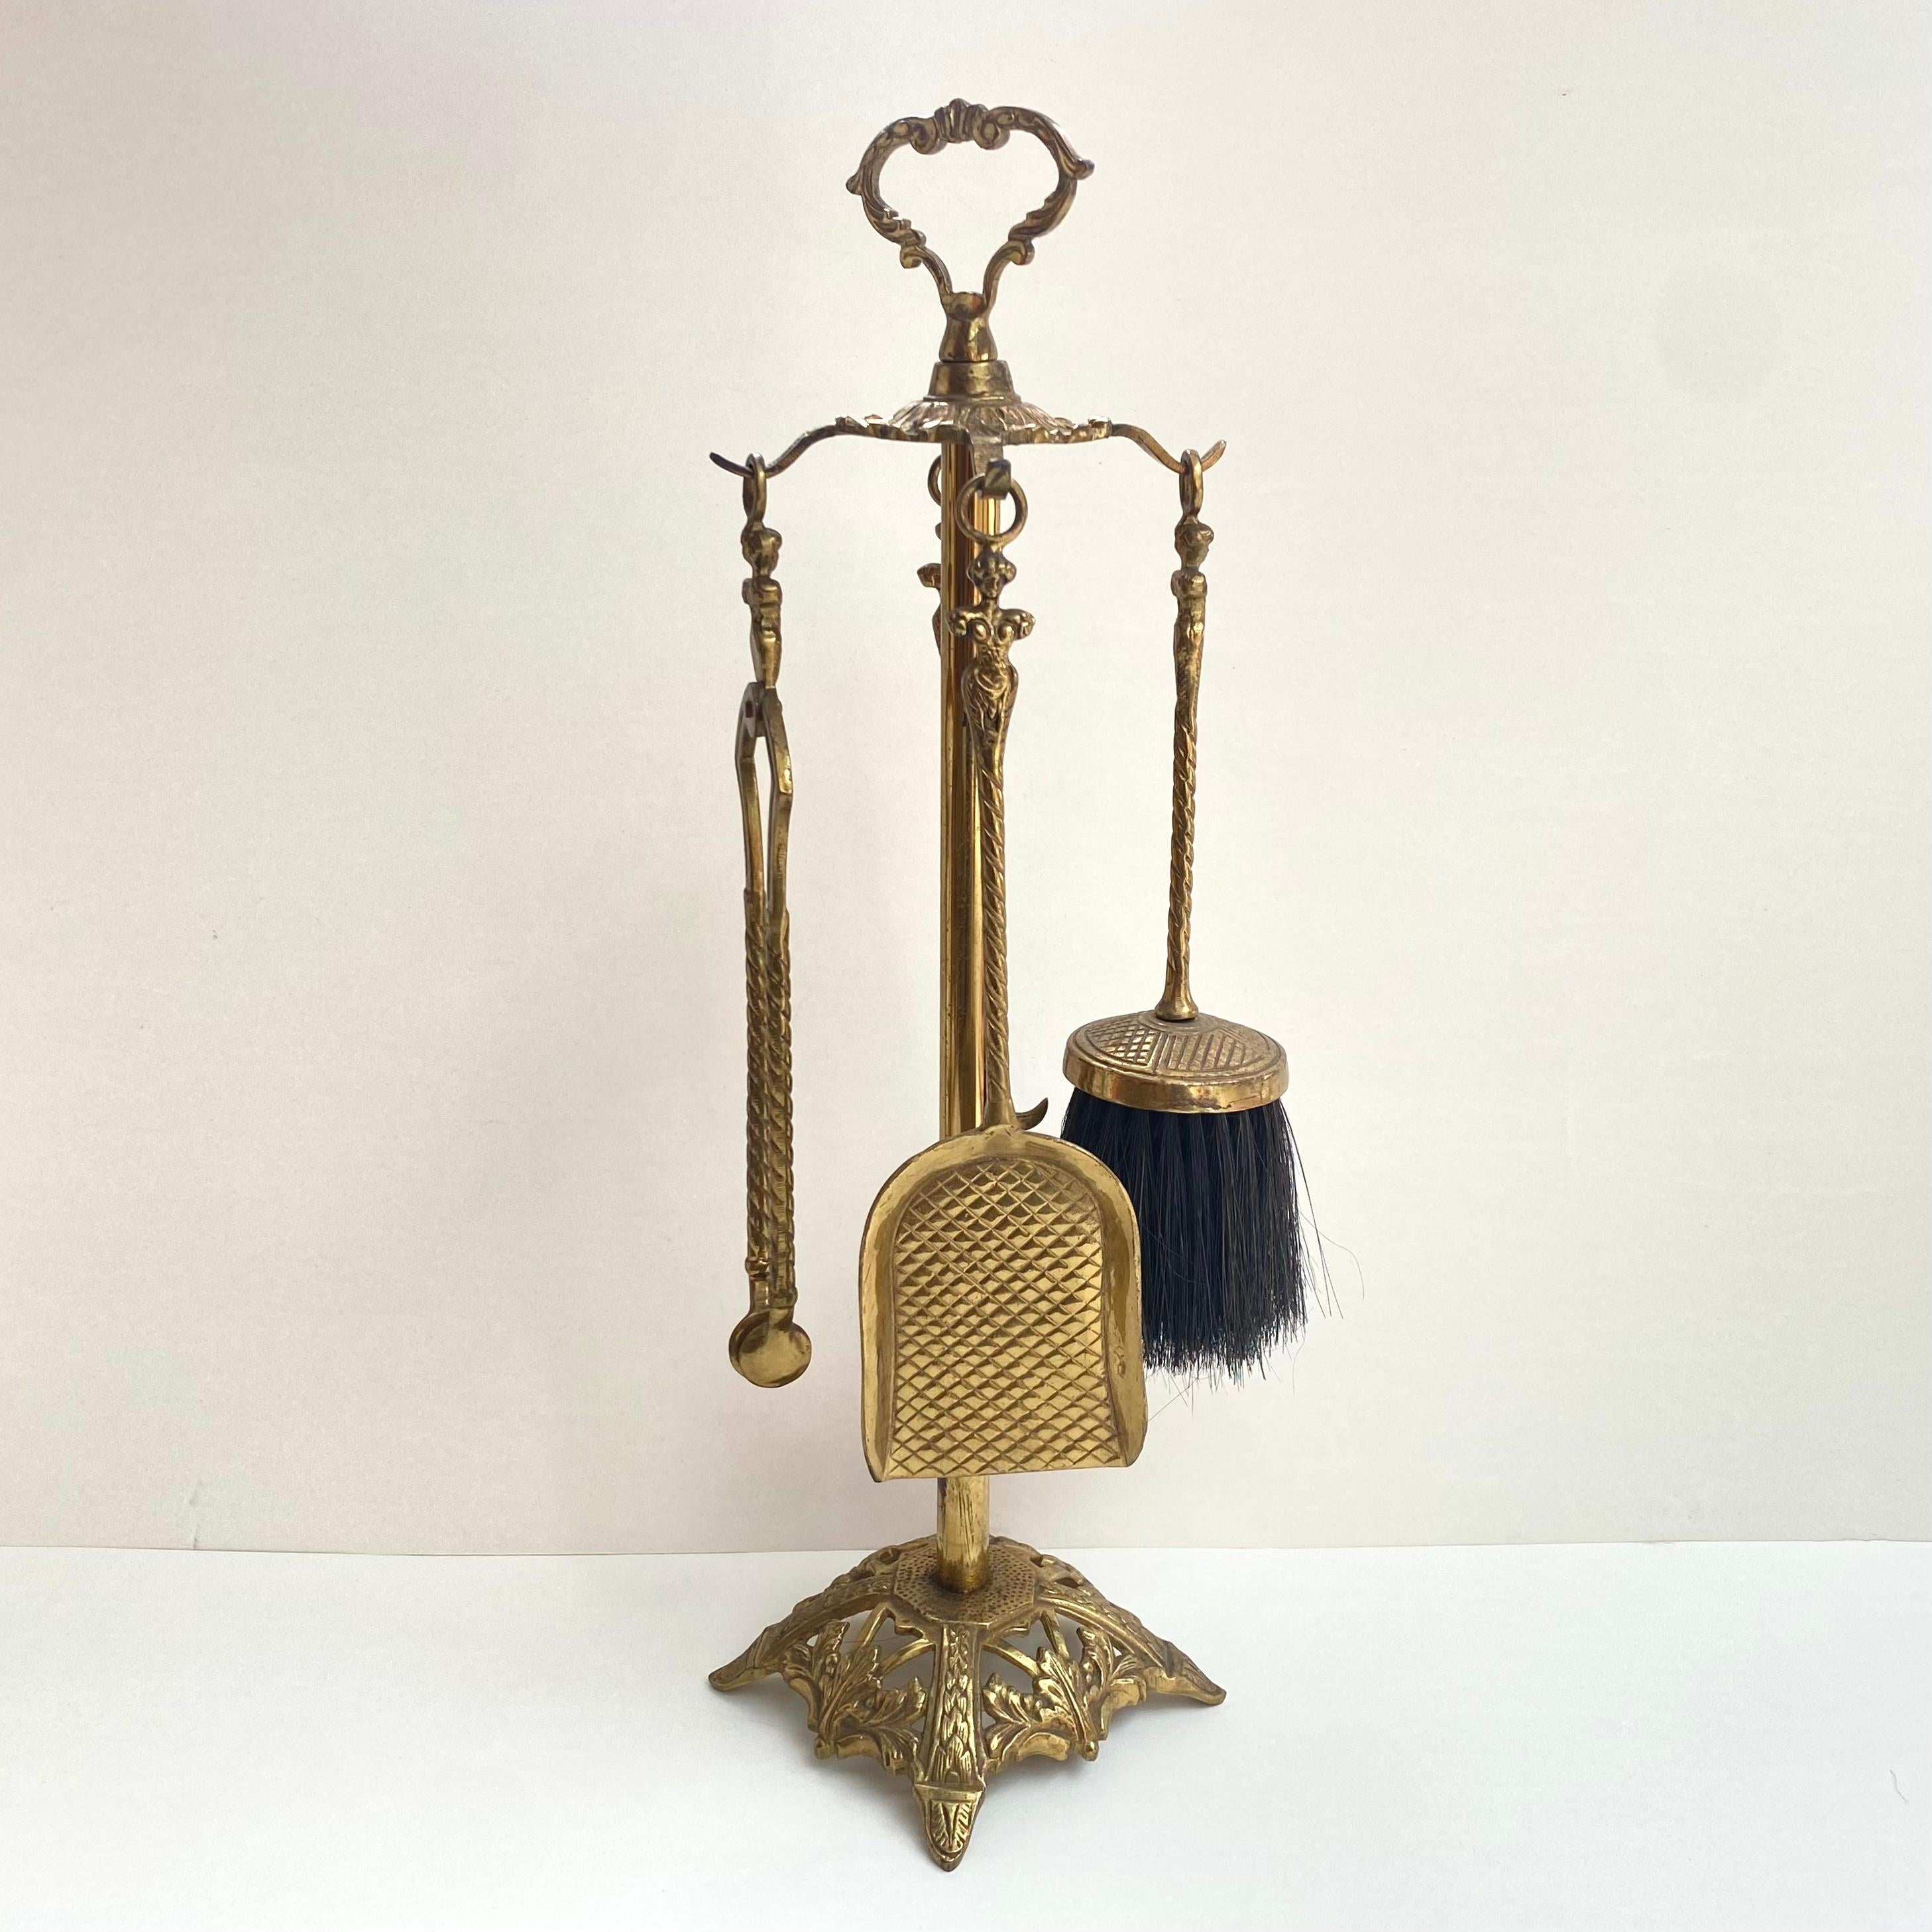 Unique forged bronze and brass antique stand with fireplace accessories in Baroque Style of early 20th century.

Classic design with little embellishment, shiny, made of cast bronze and brass. Interesting design handles.

The fireplace set